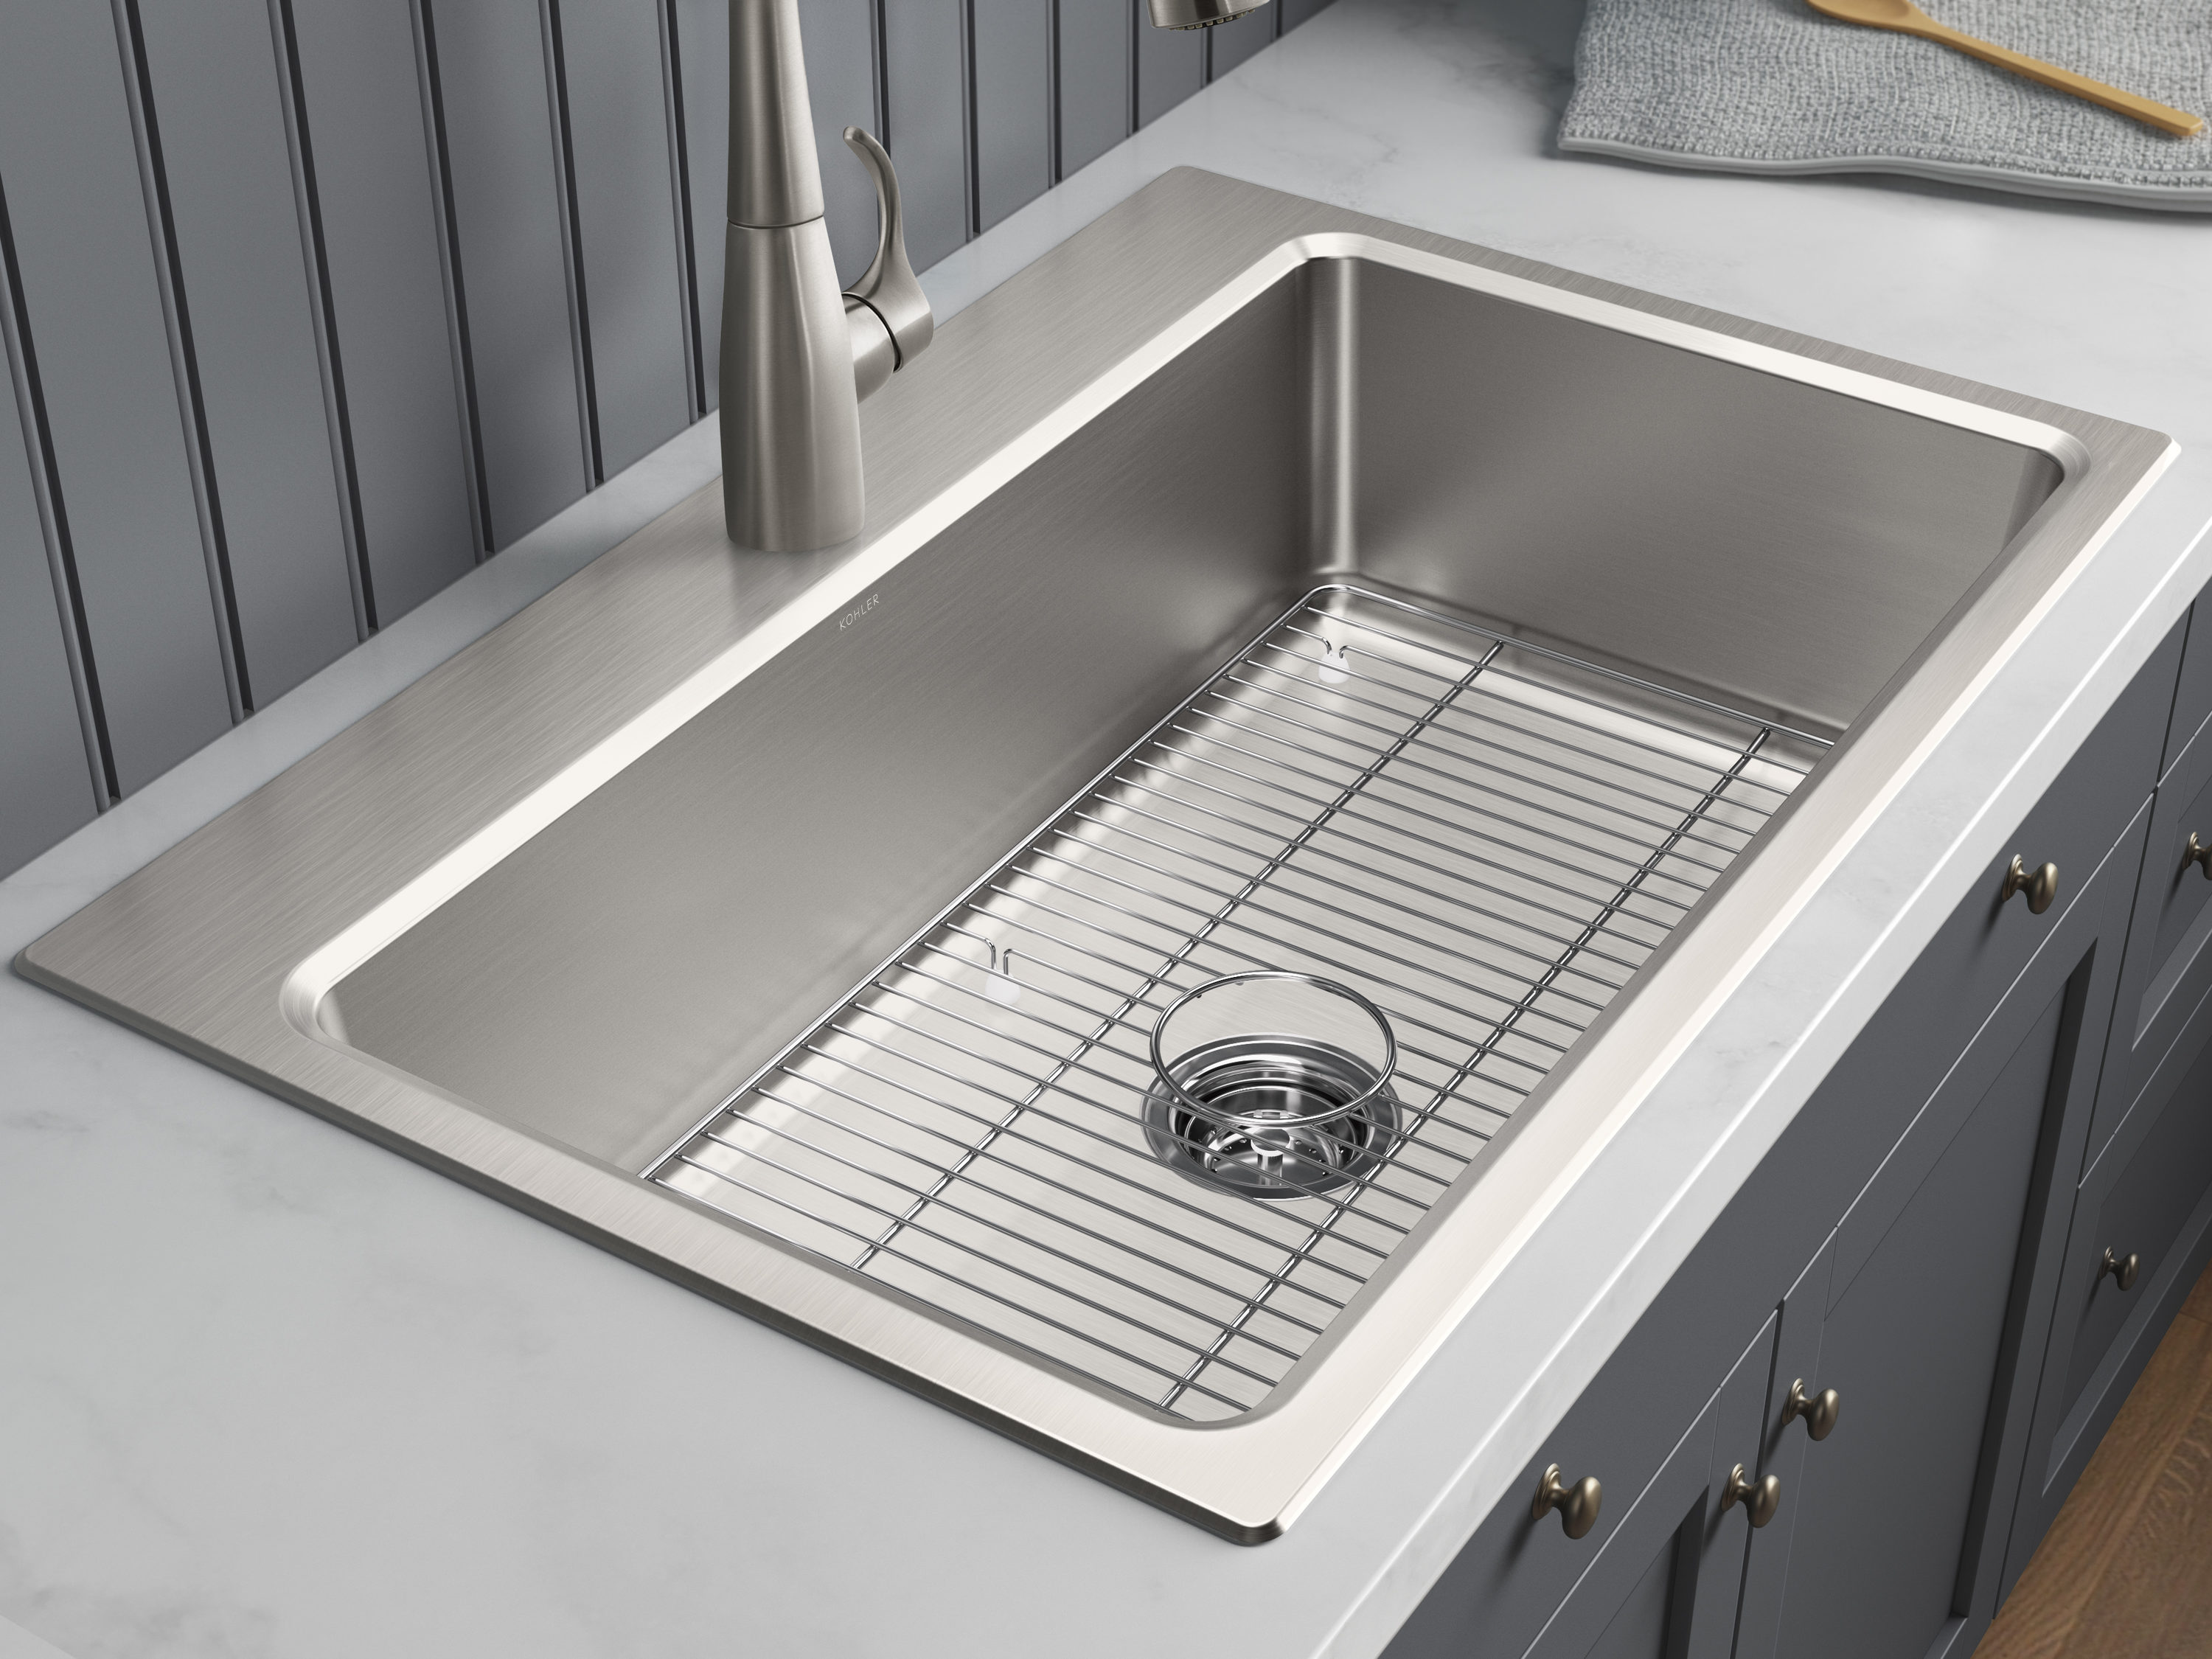 Kohler Prologue Dual Mount 33 In X 22 In Stainless Steel Single Bowl 1